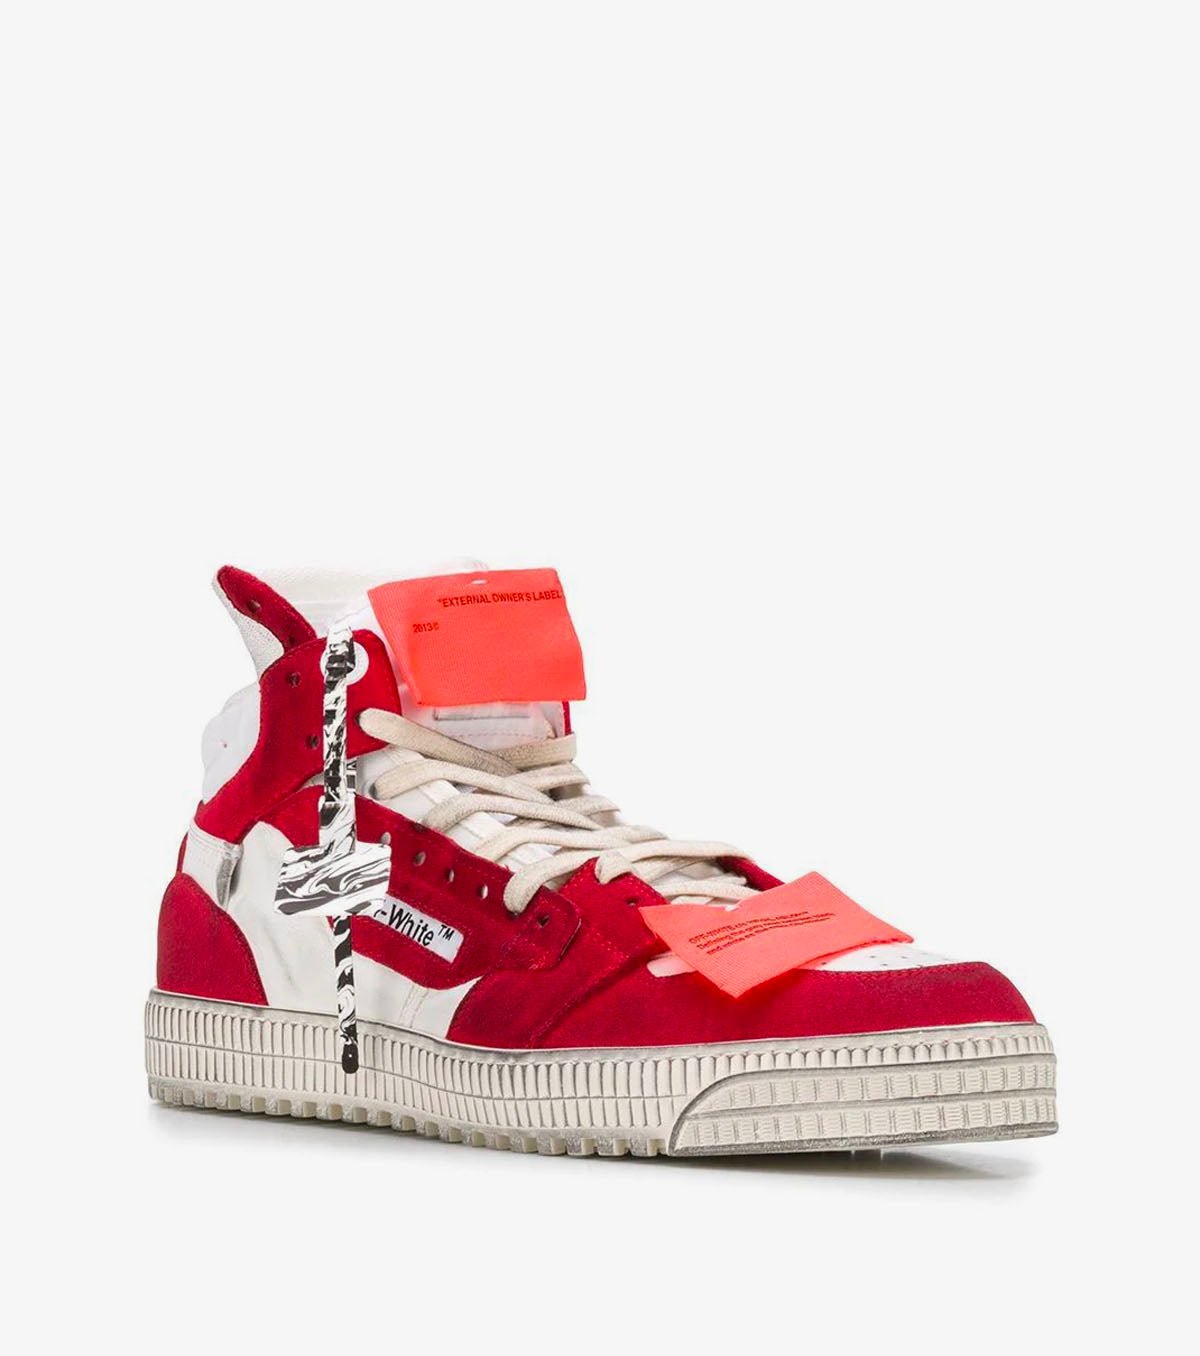 Off Court high-top sneakers - SNKRBASE